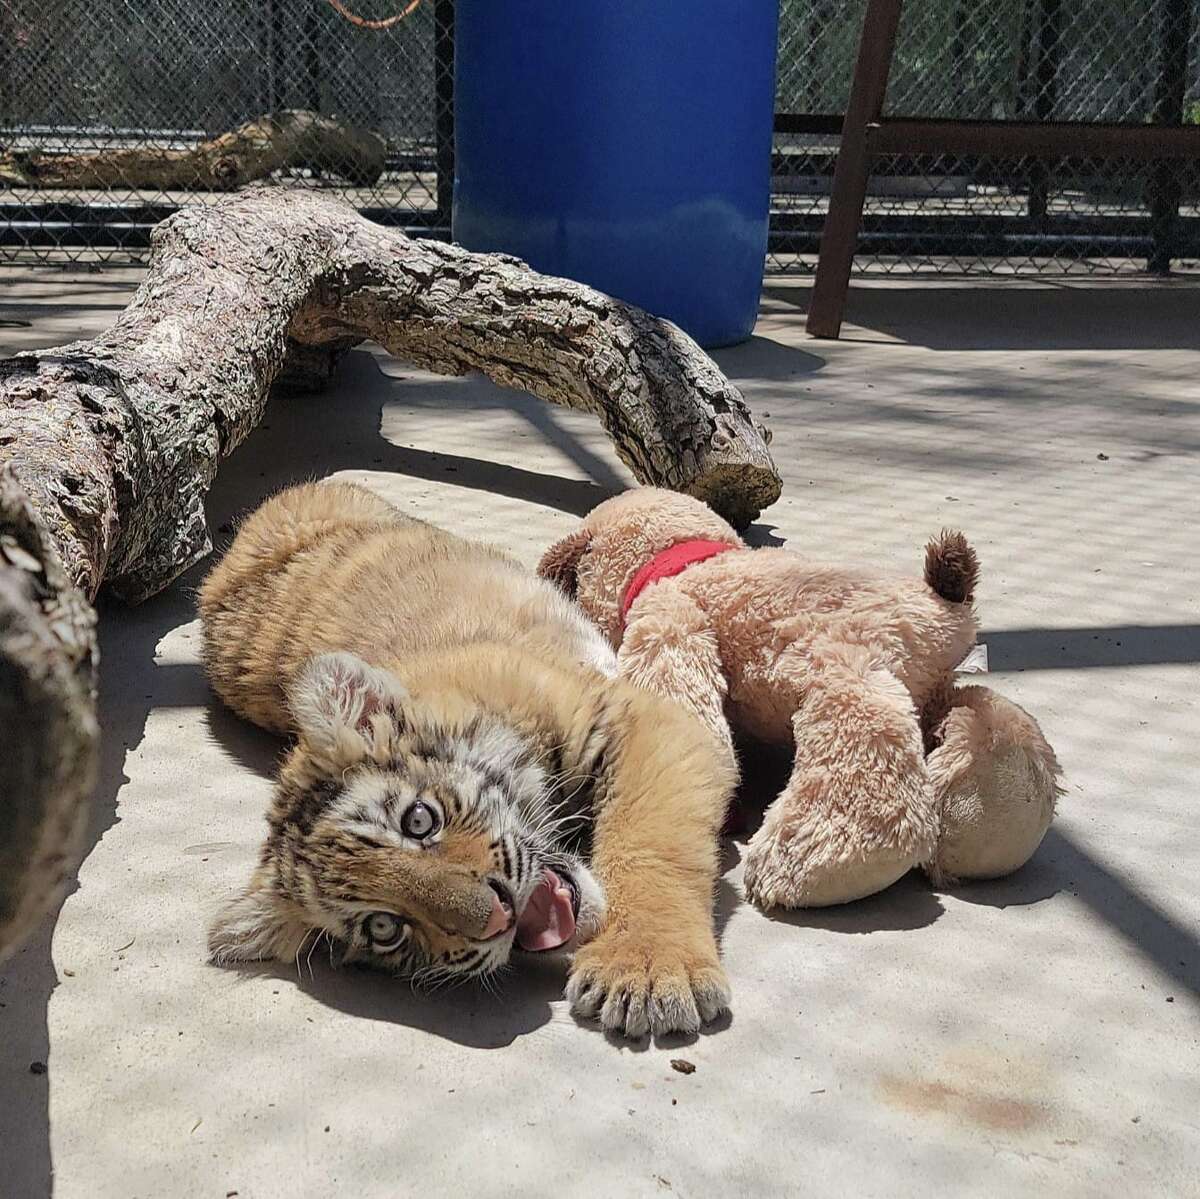 Pictured is the 2-3 month old bengal tiger who was discovered in a Laredo home on April 22. Now named Minnie, the tiger is located at the In-Sync Exotics Wildlife Rescue and Educational Center in Wylie.